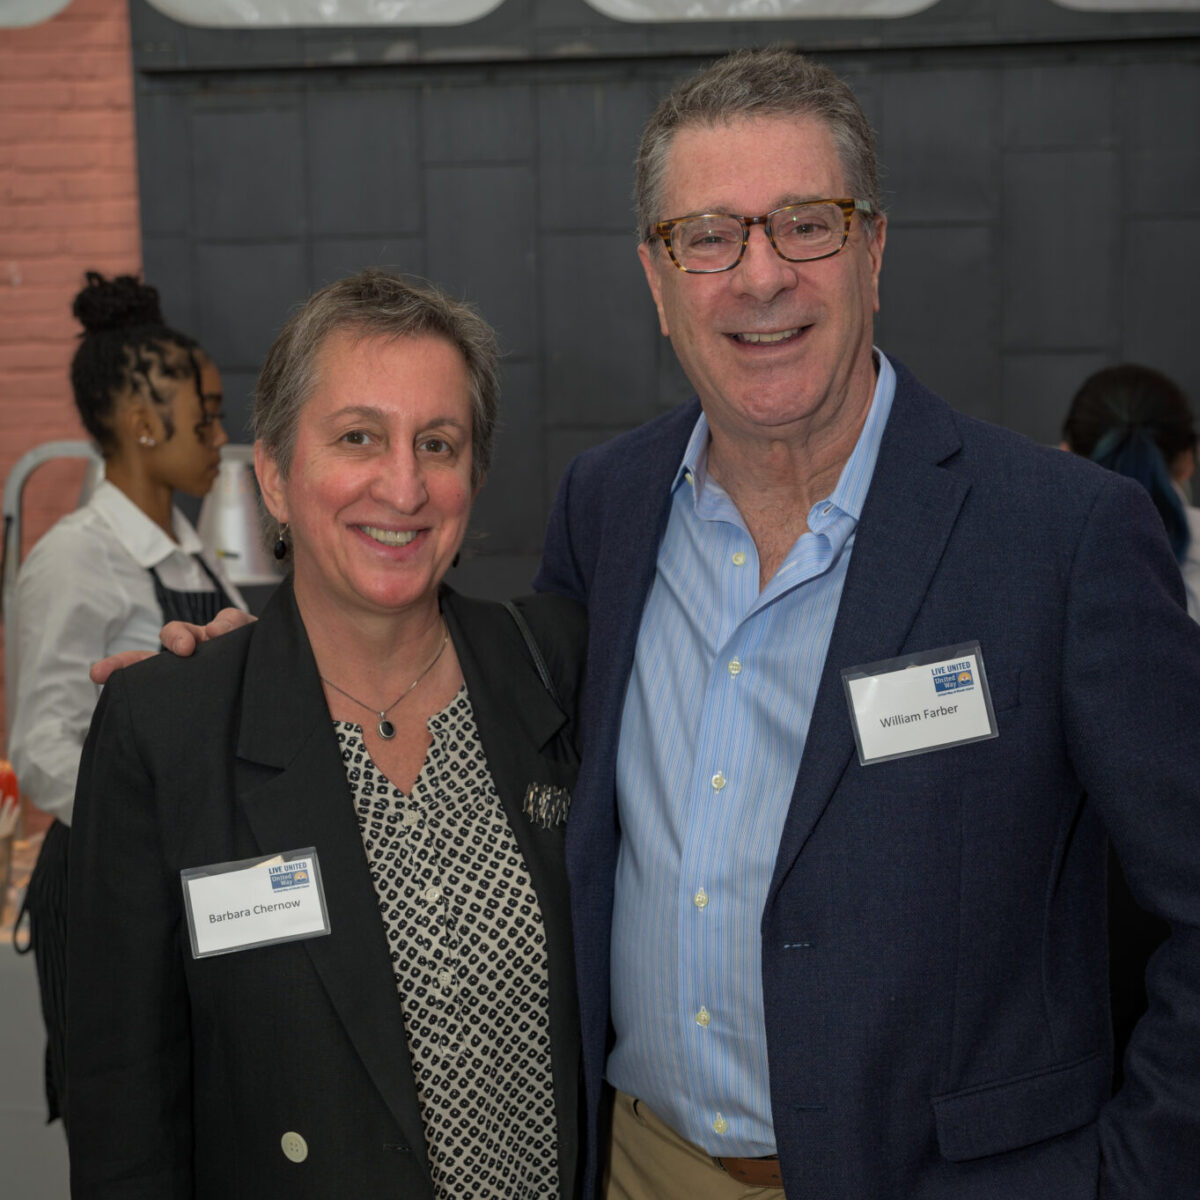 Barbara Chernow and William Farber, supporters of United Way of Rhode Island, pose for a photo.